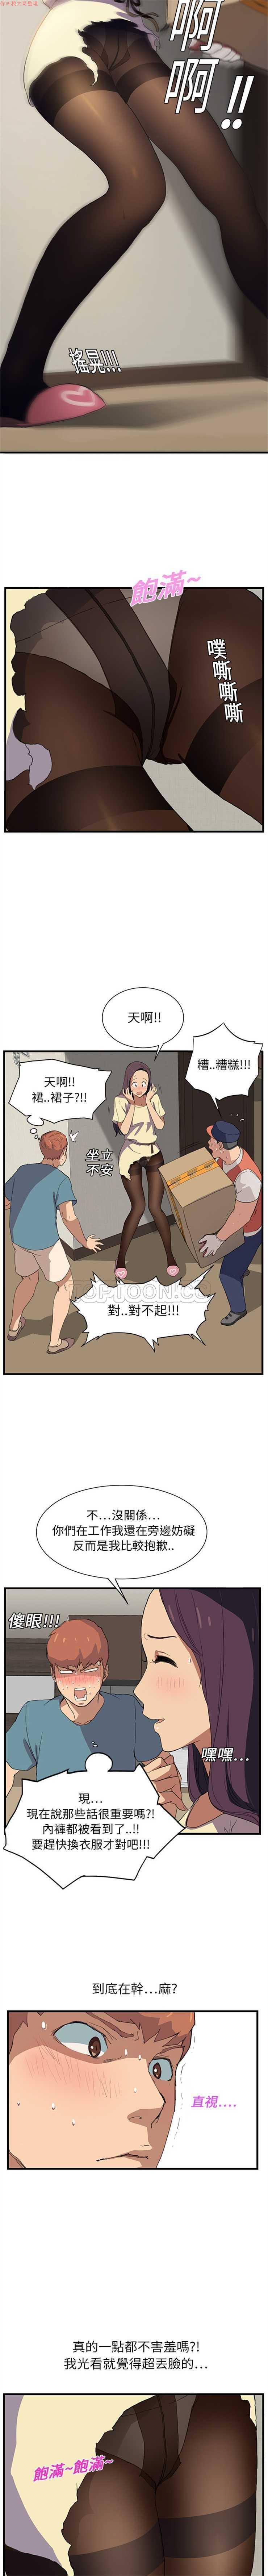 Perfect Ass 继母 Chinese Gostoso - Page 9